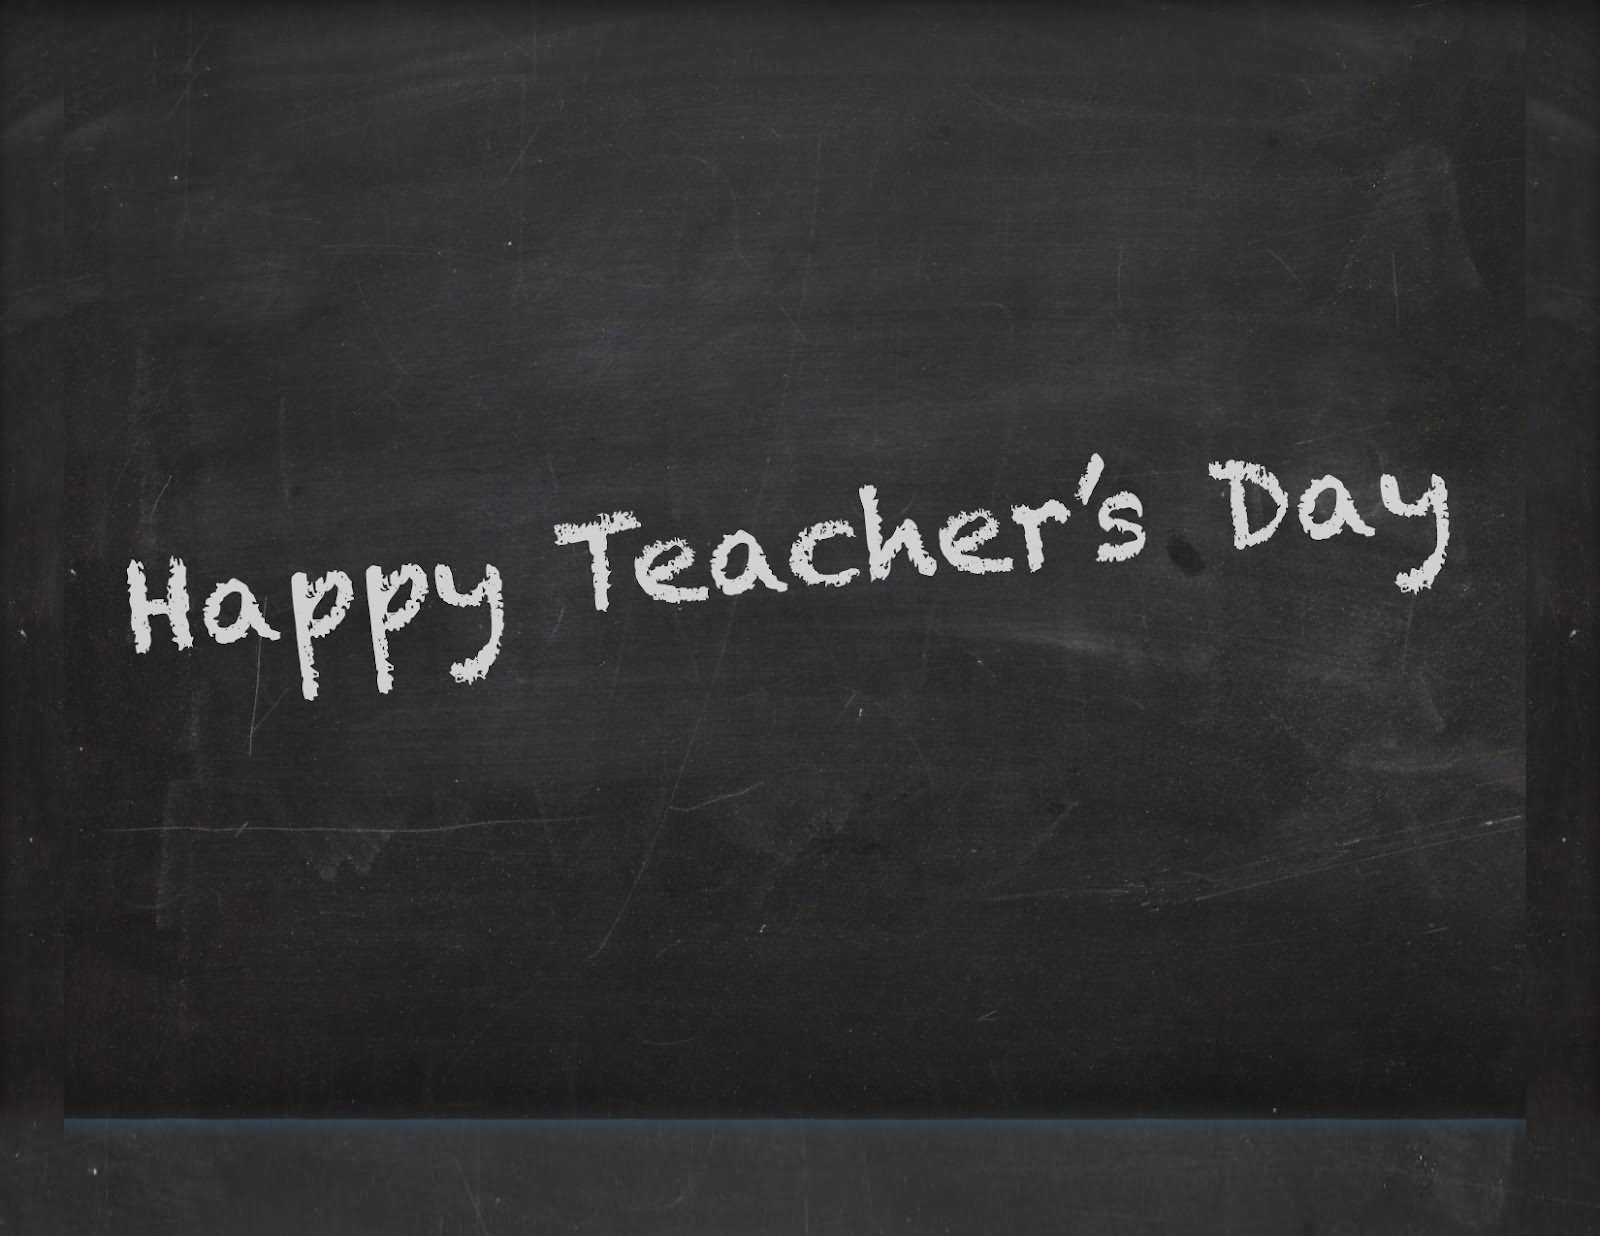 Happy Teacher’s Day Wishes On Black Board Picture